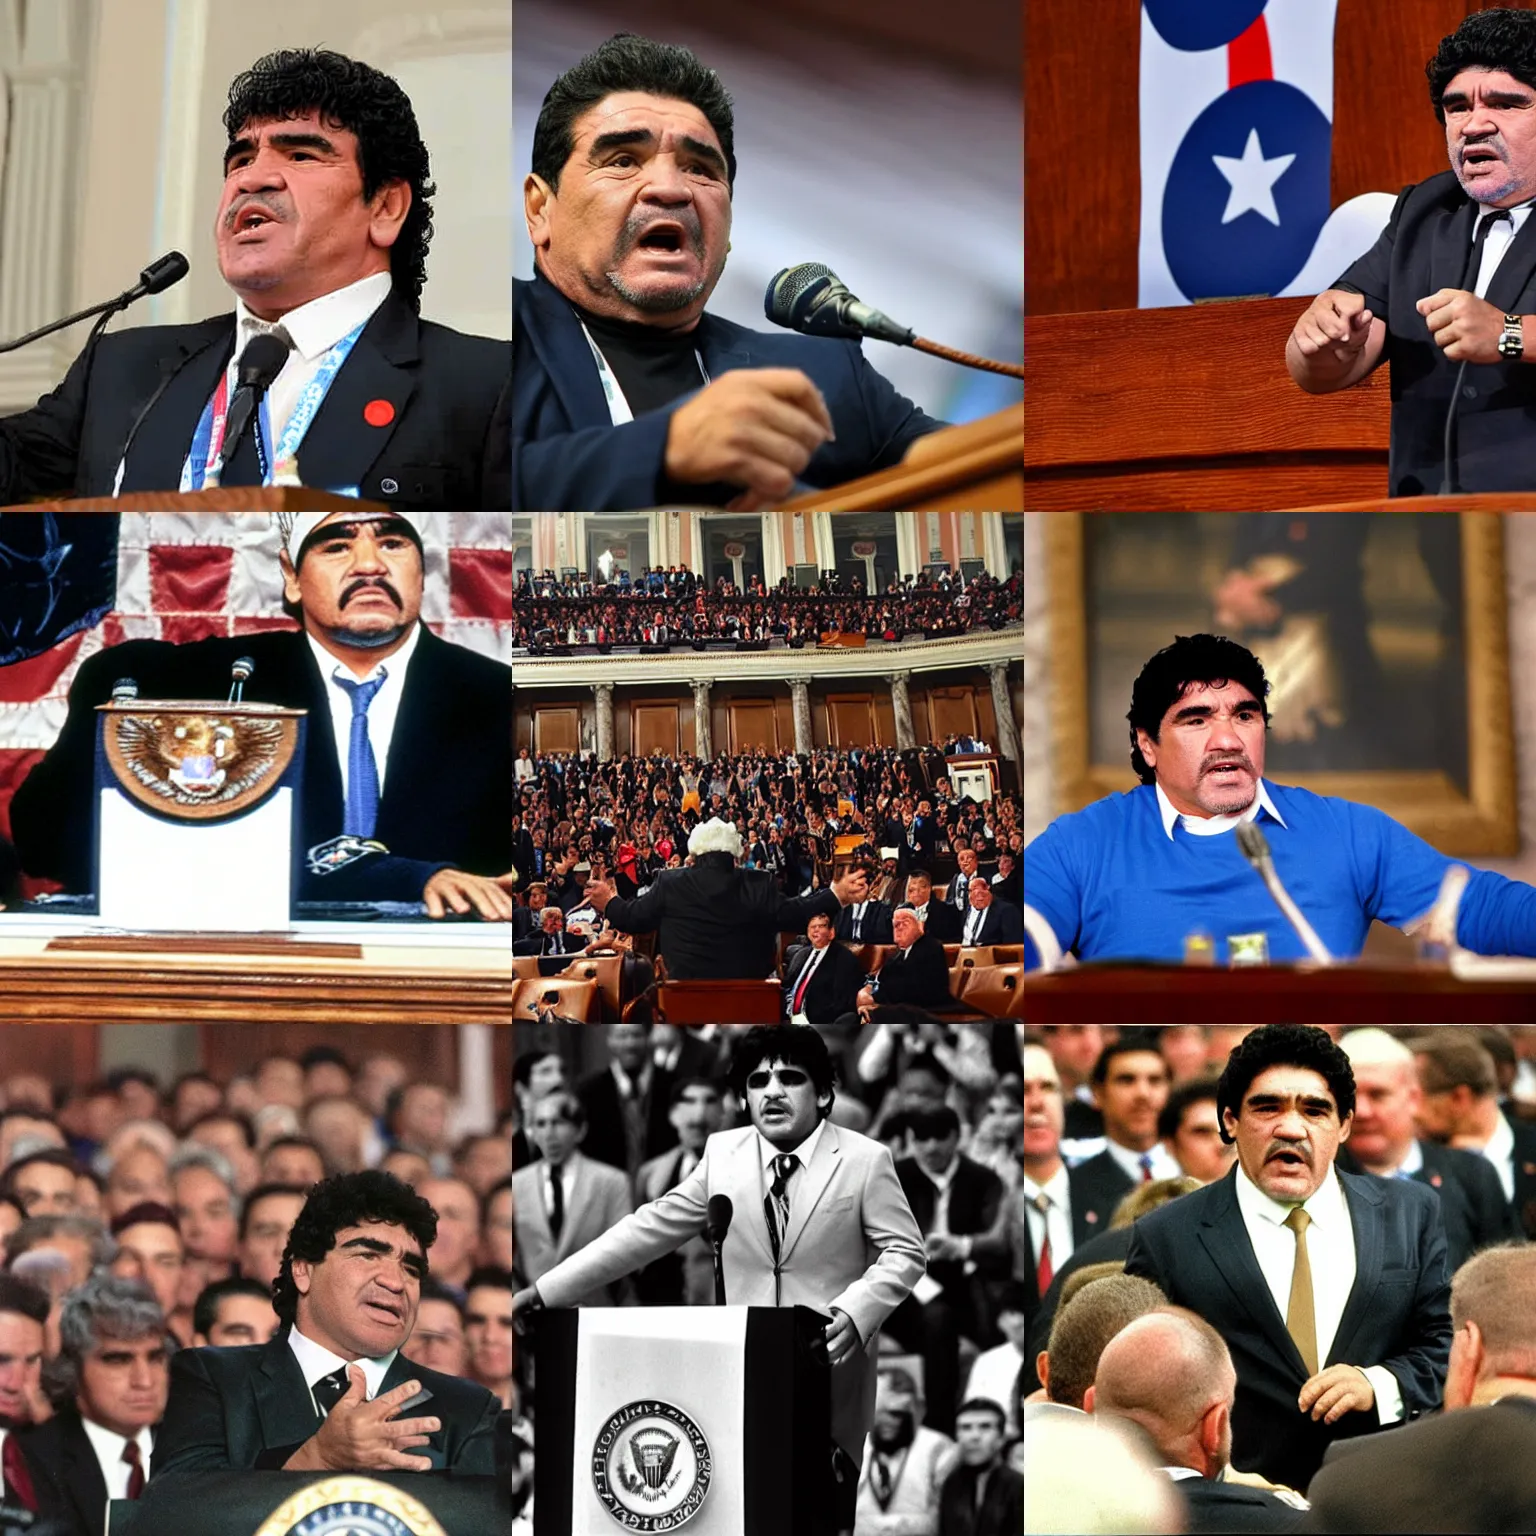 Prompt: Diego Maradona giving a speech in the US Congress